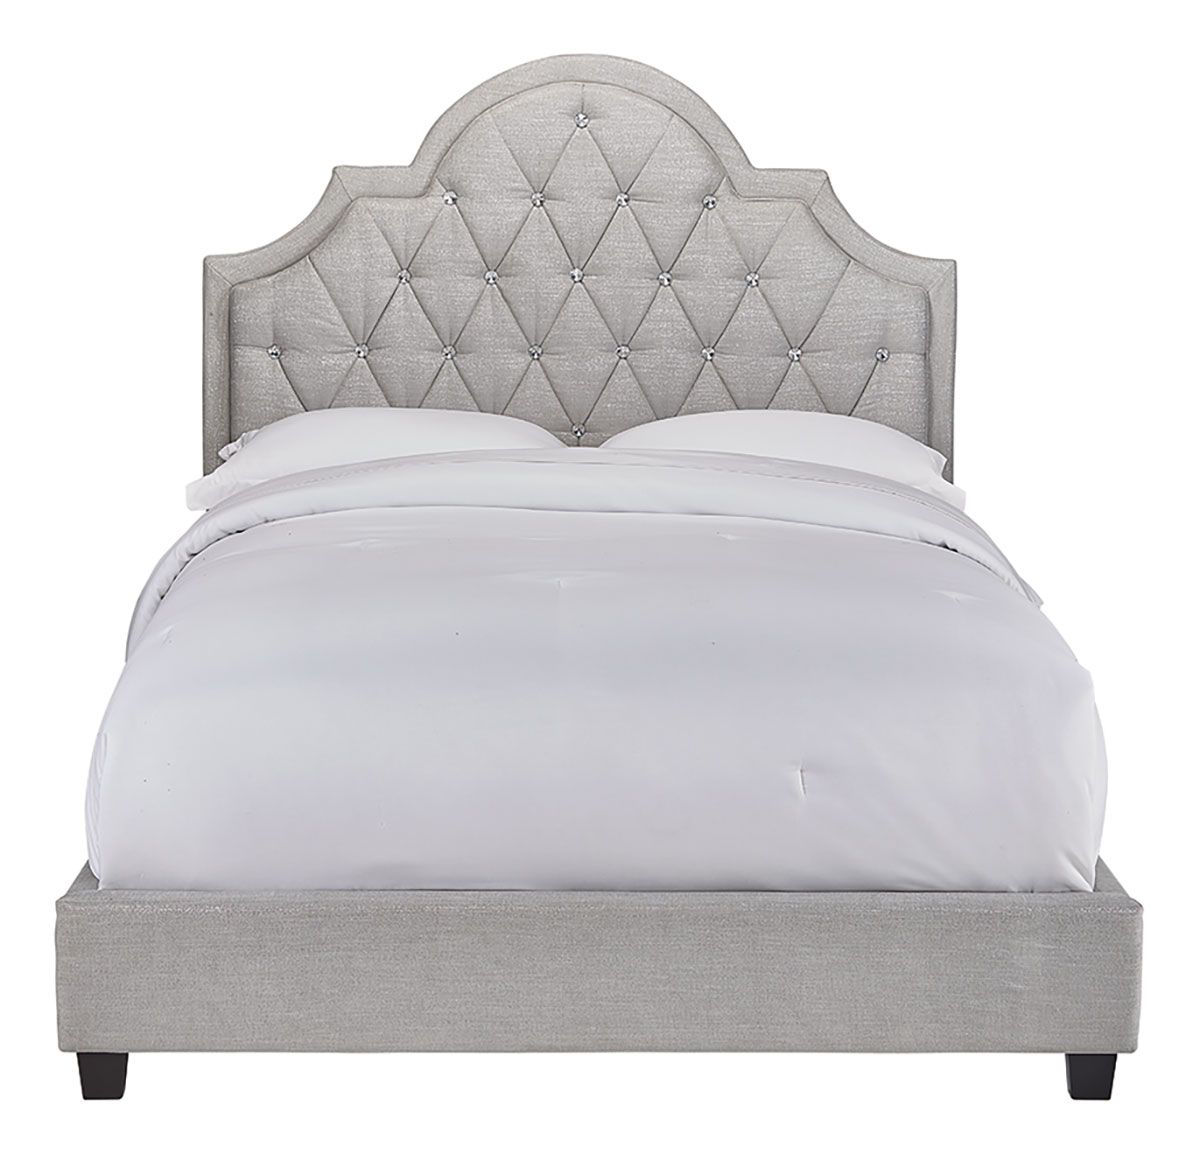 Belle Complete Twin Bed Bad Home, What Size Is A Twin Bed